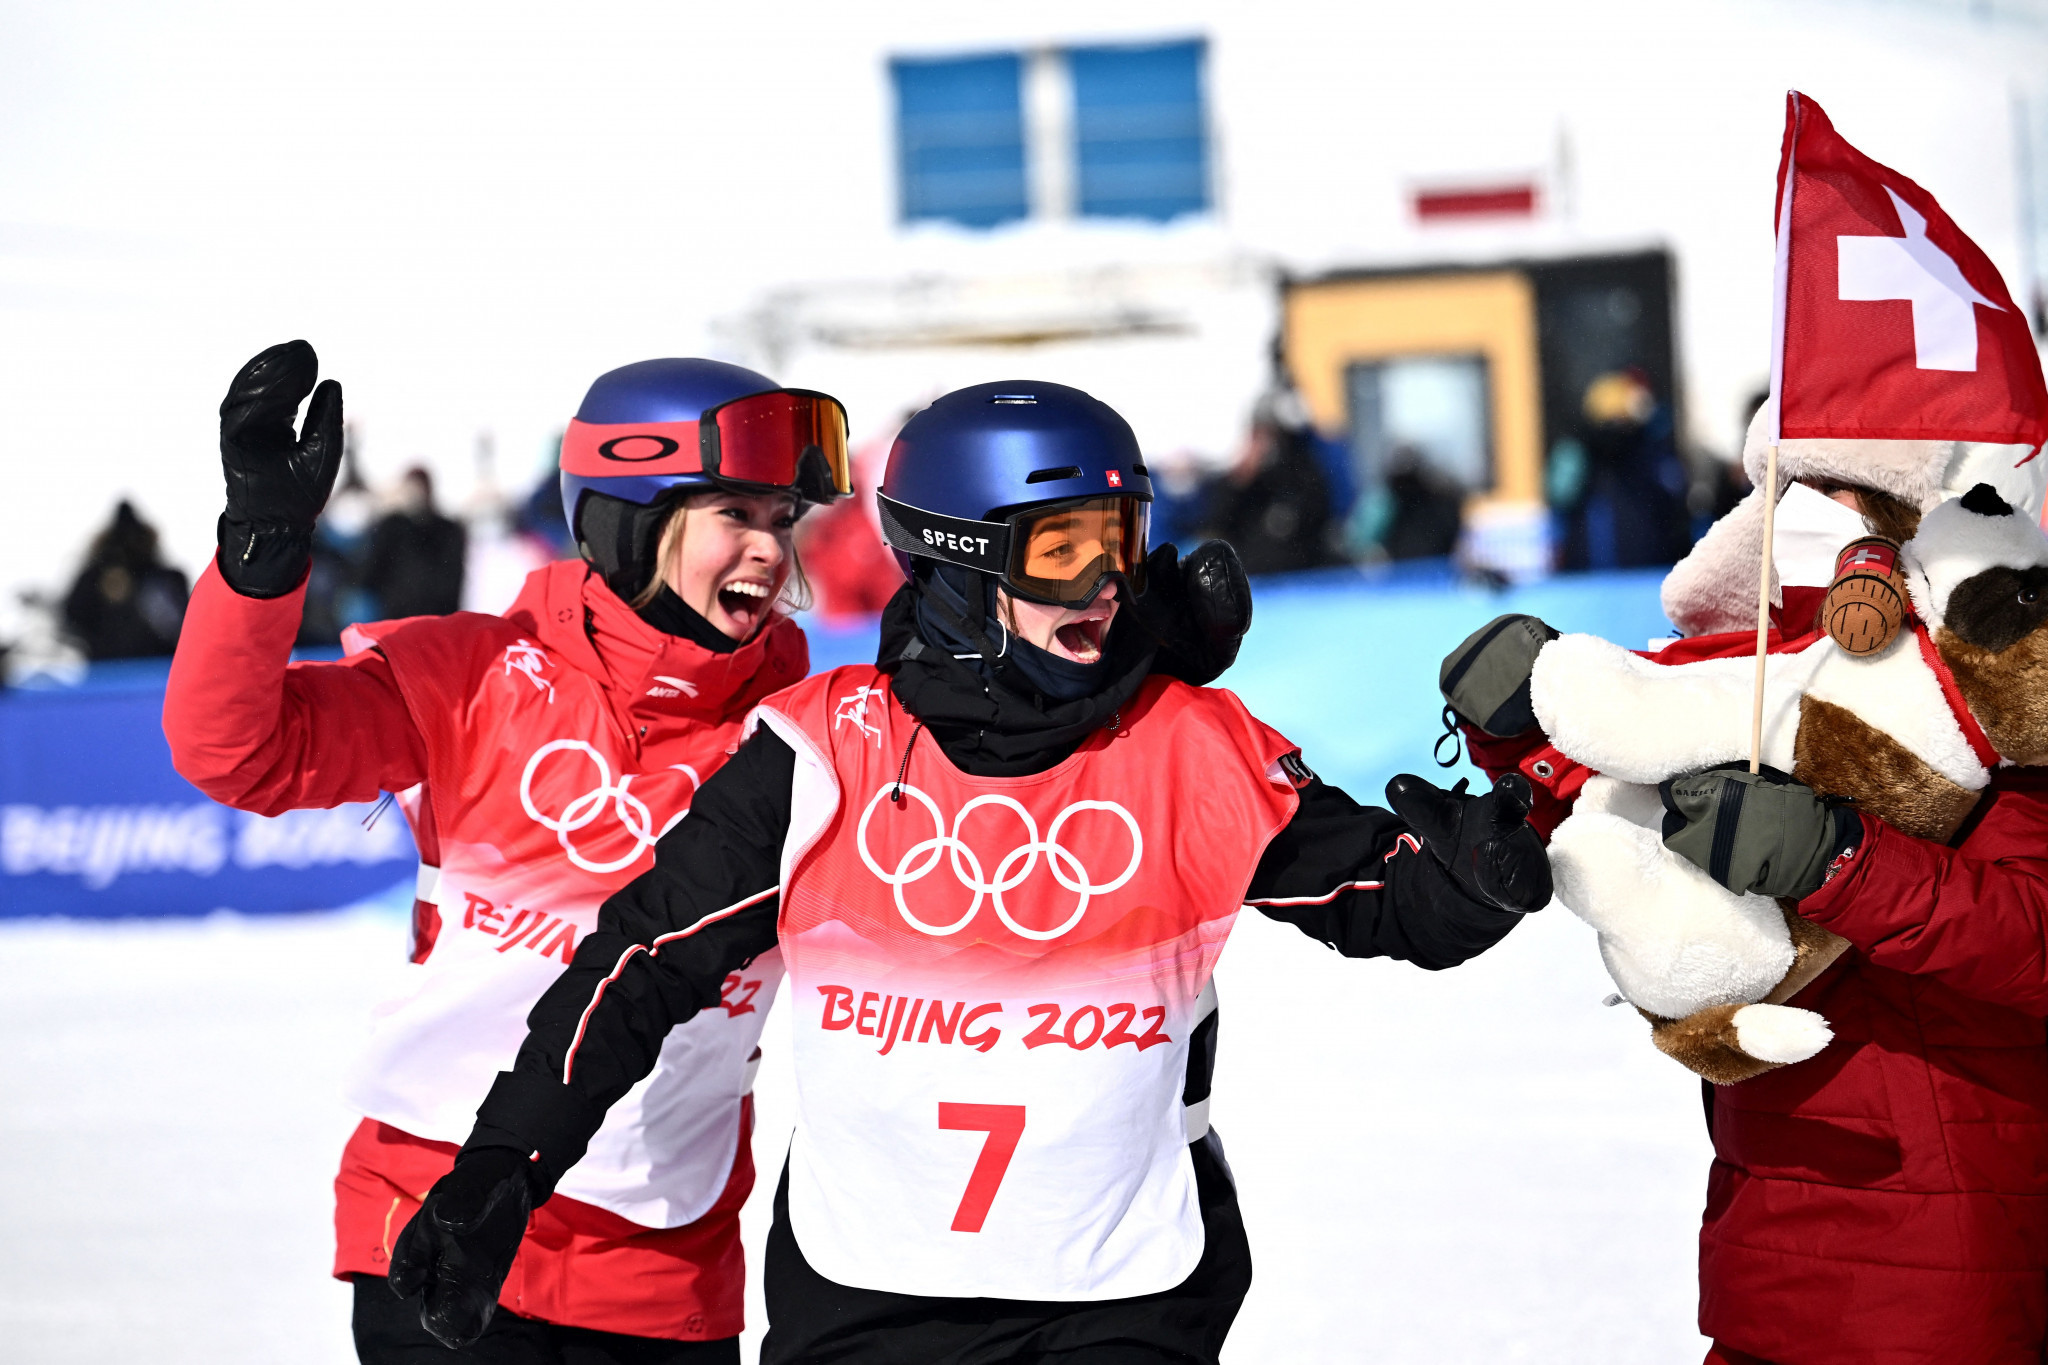 Gremaud wins women's ski slopestyle gold after difficult qualifying at Beijing 2022